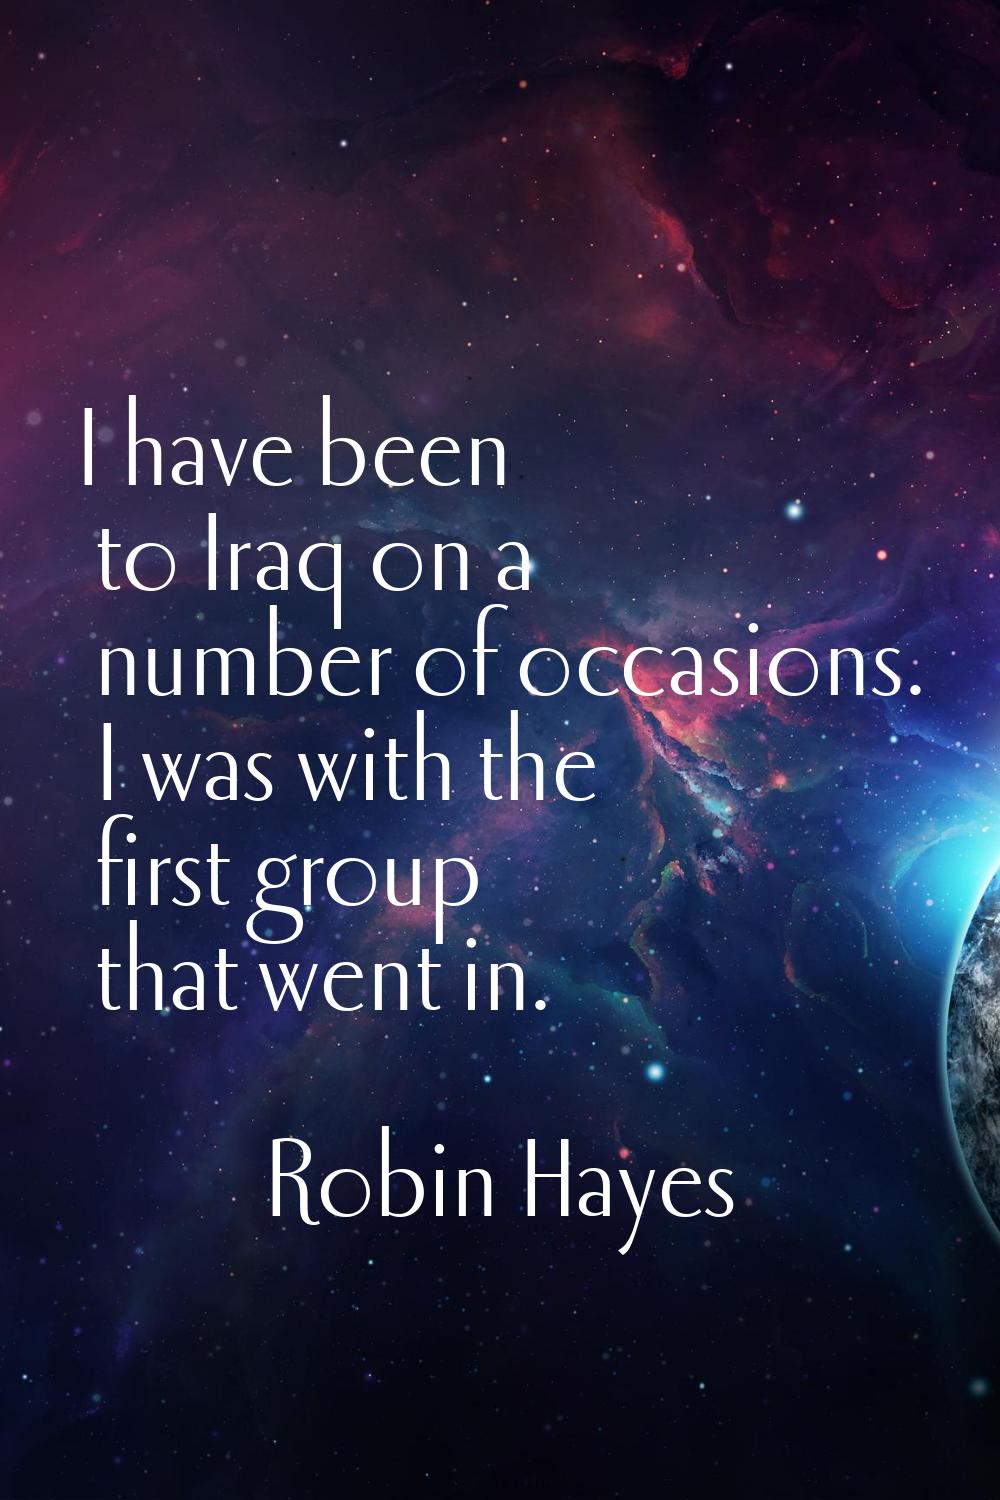 I have been to Iraq on a number of occasions. I was with the first group that went in.